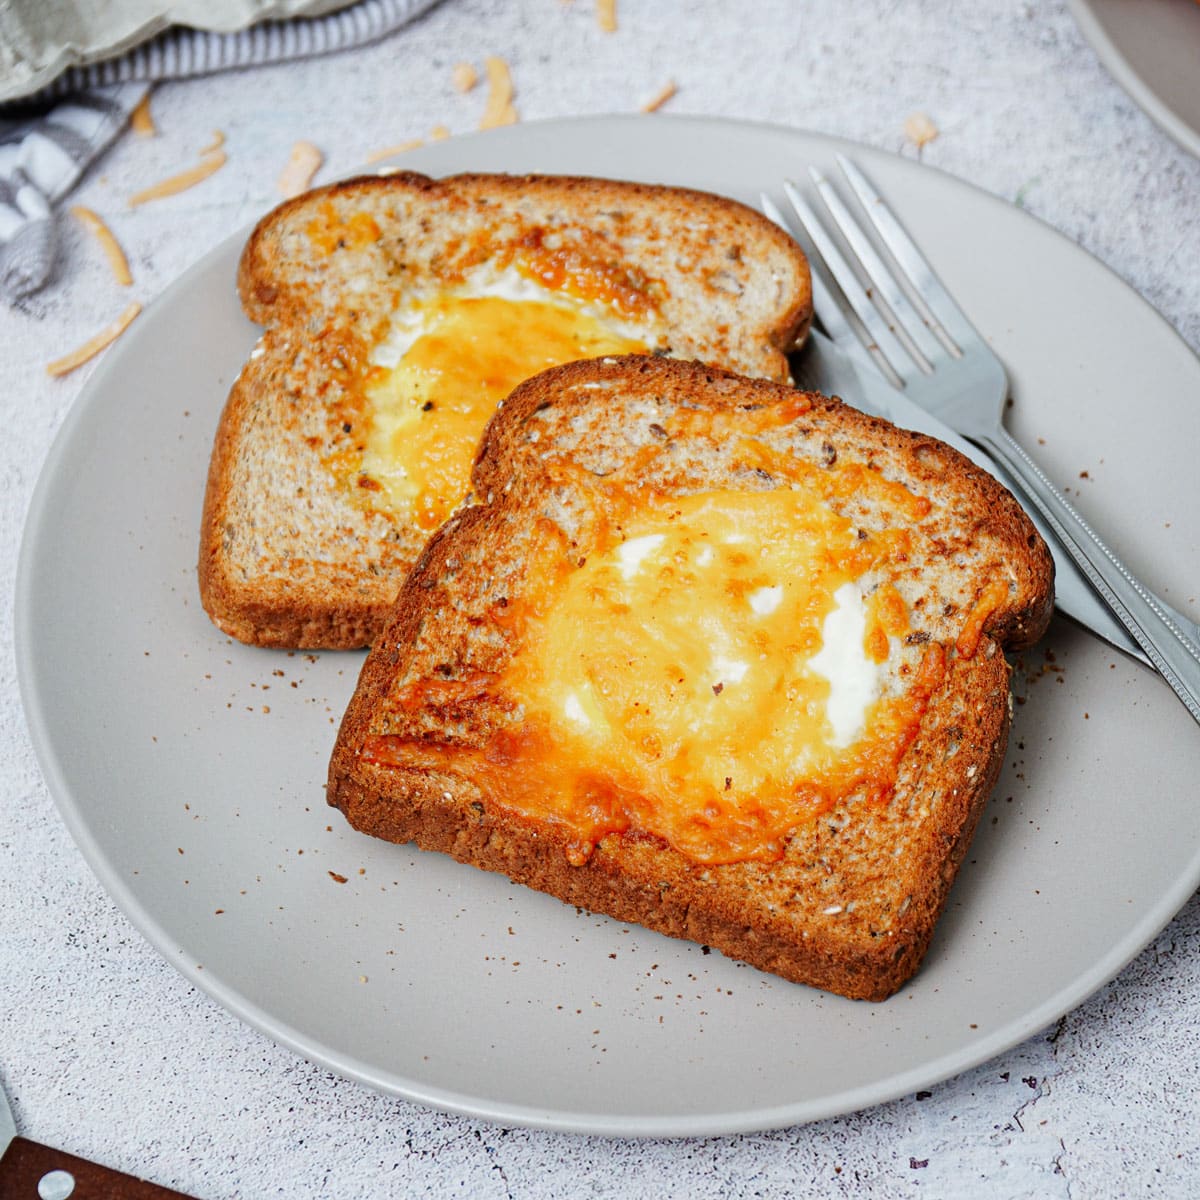 Air Fryer Toast - Plated Cravings